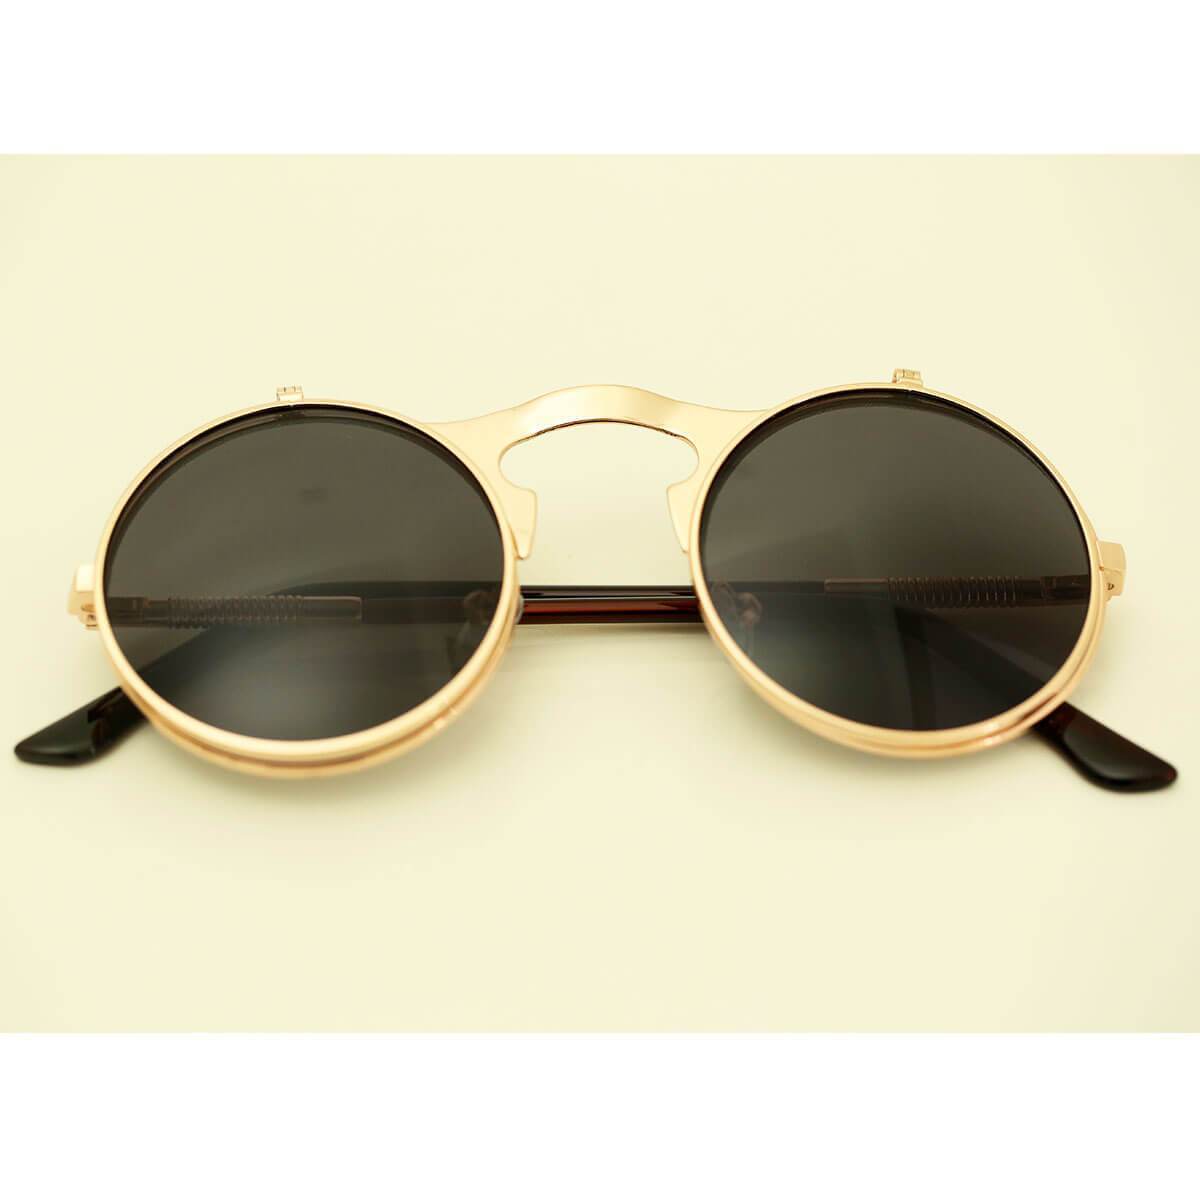 A vintage pair of Steampunk Flip-Up Round Double Lens Sunglasses perfect for outdoor activities.